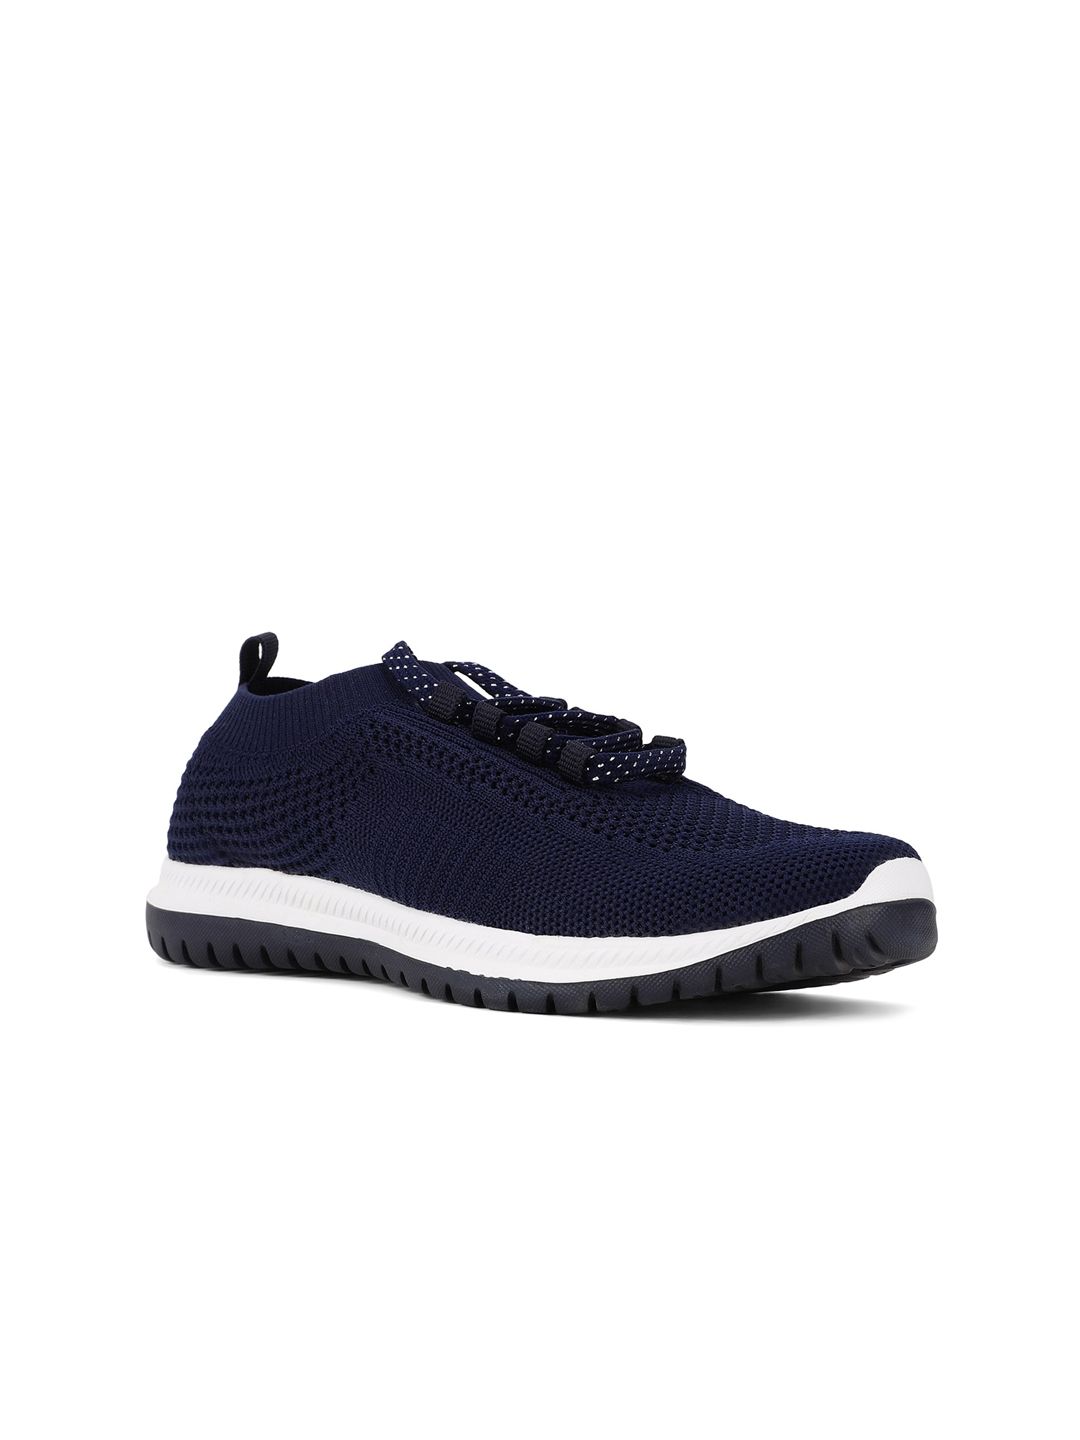 North Star Women Navy Blue Woven Design Sneakers Price in India